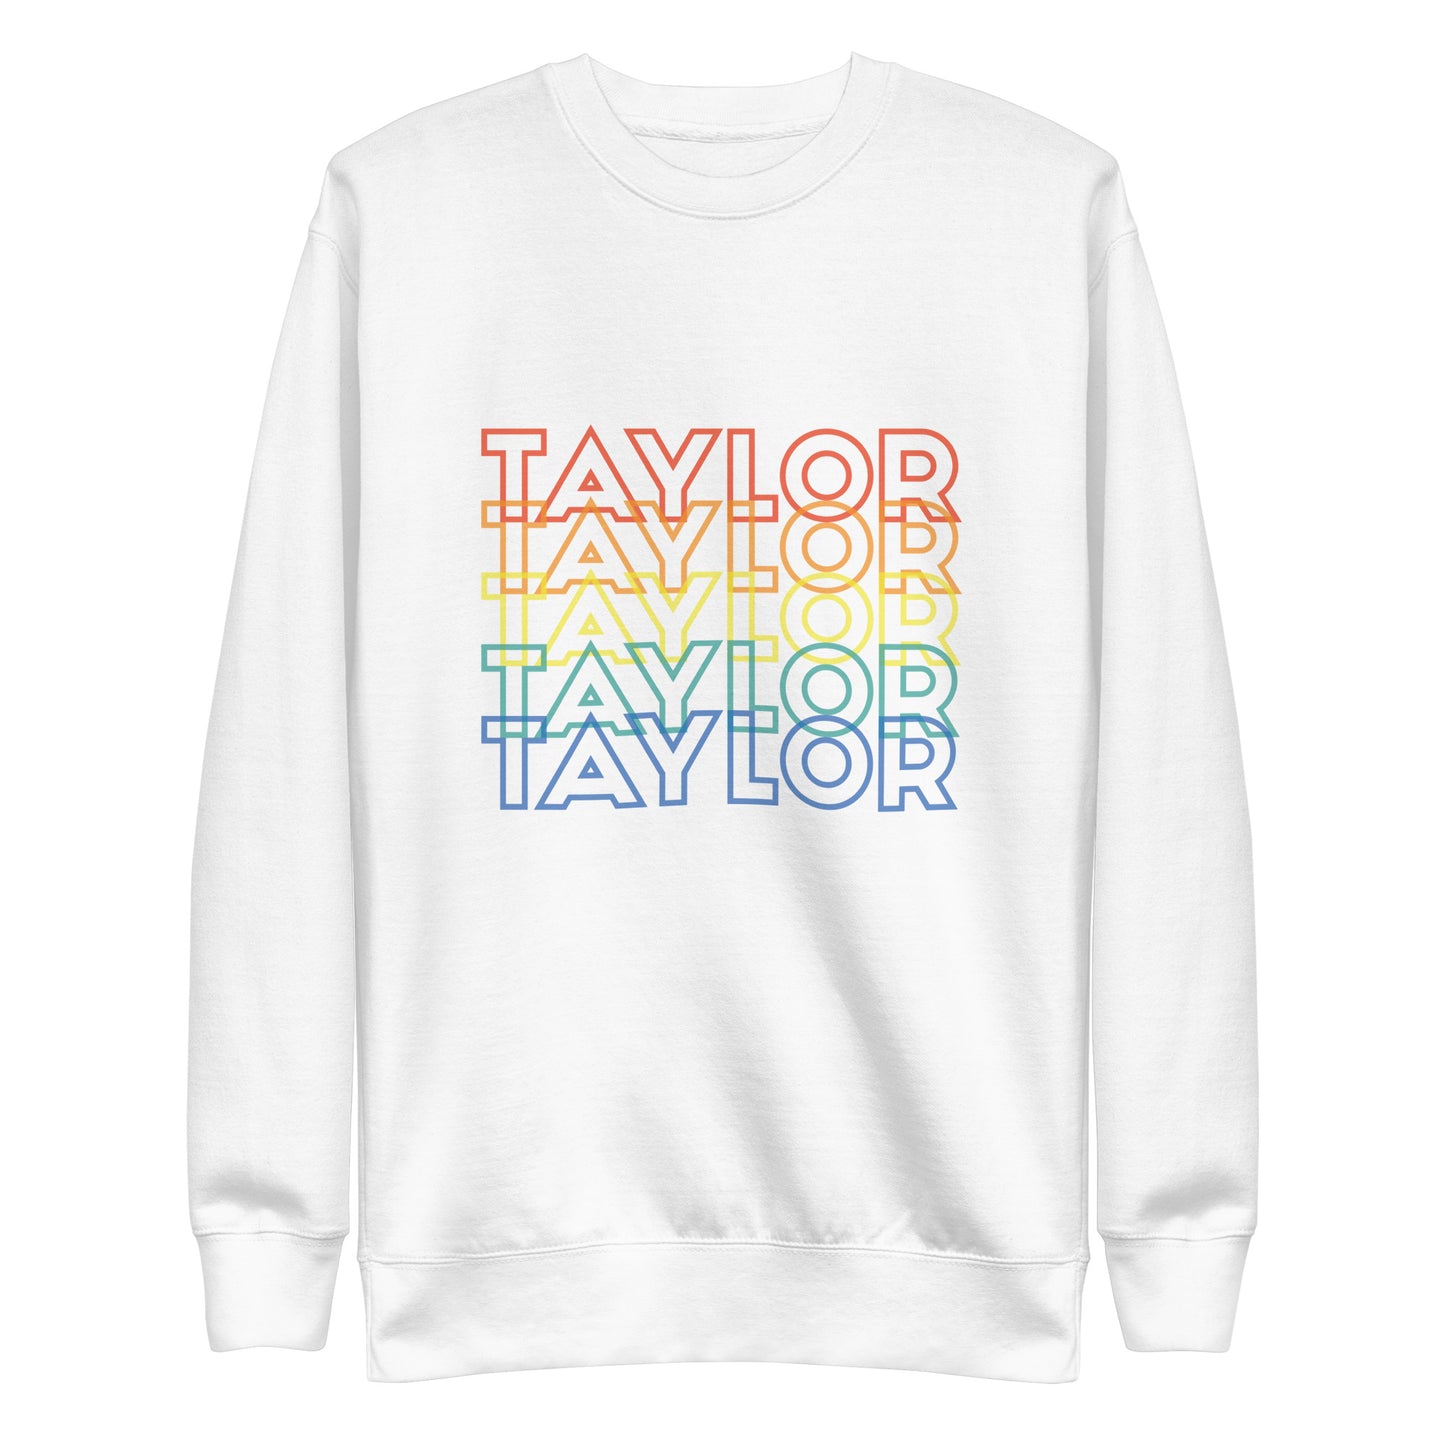 Taylor - Inspired By Taylor Swift - Sustainably Made Sweatshirt